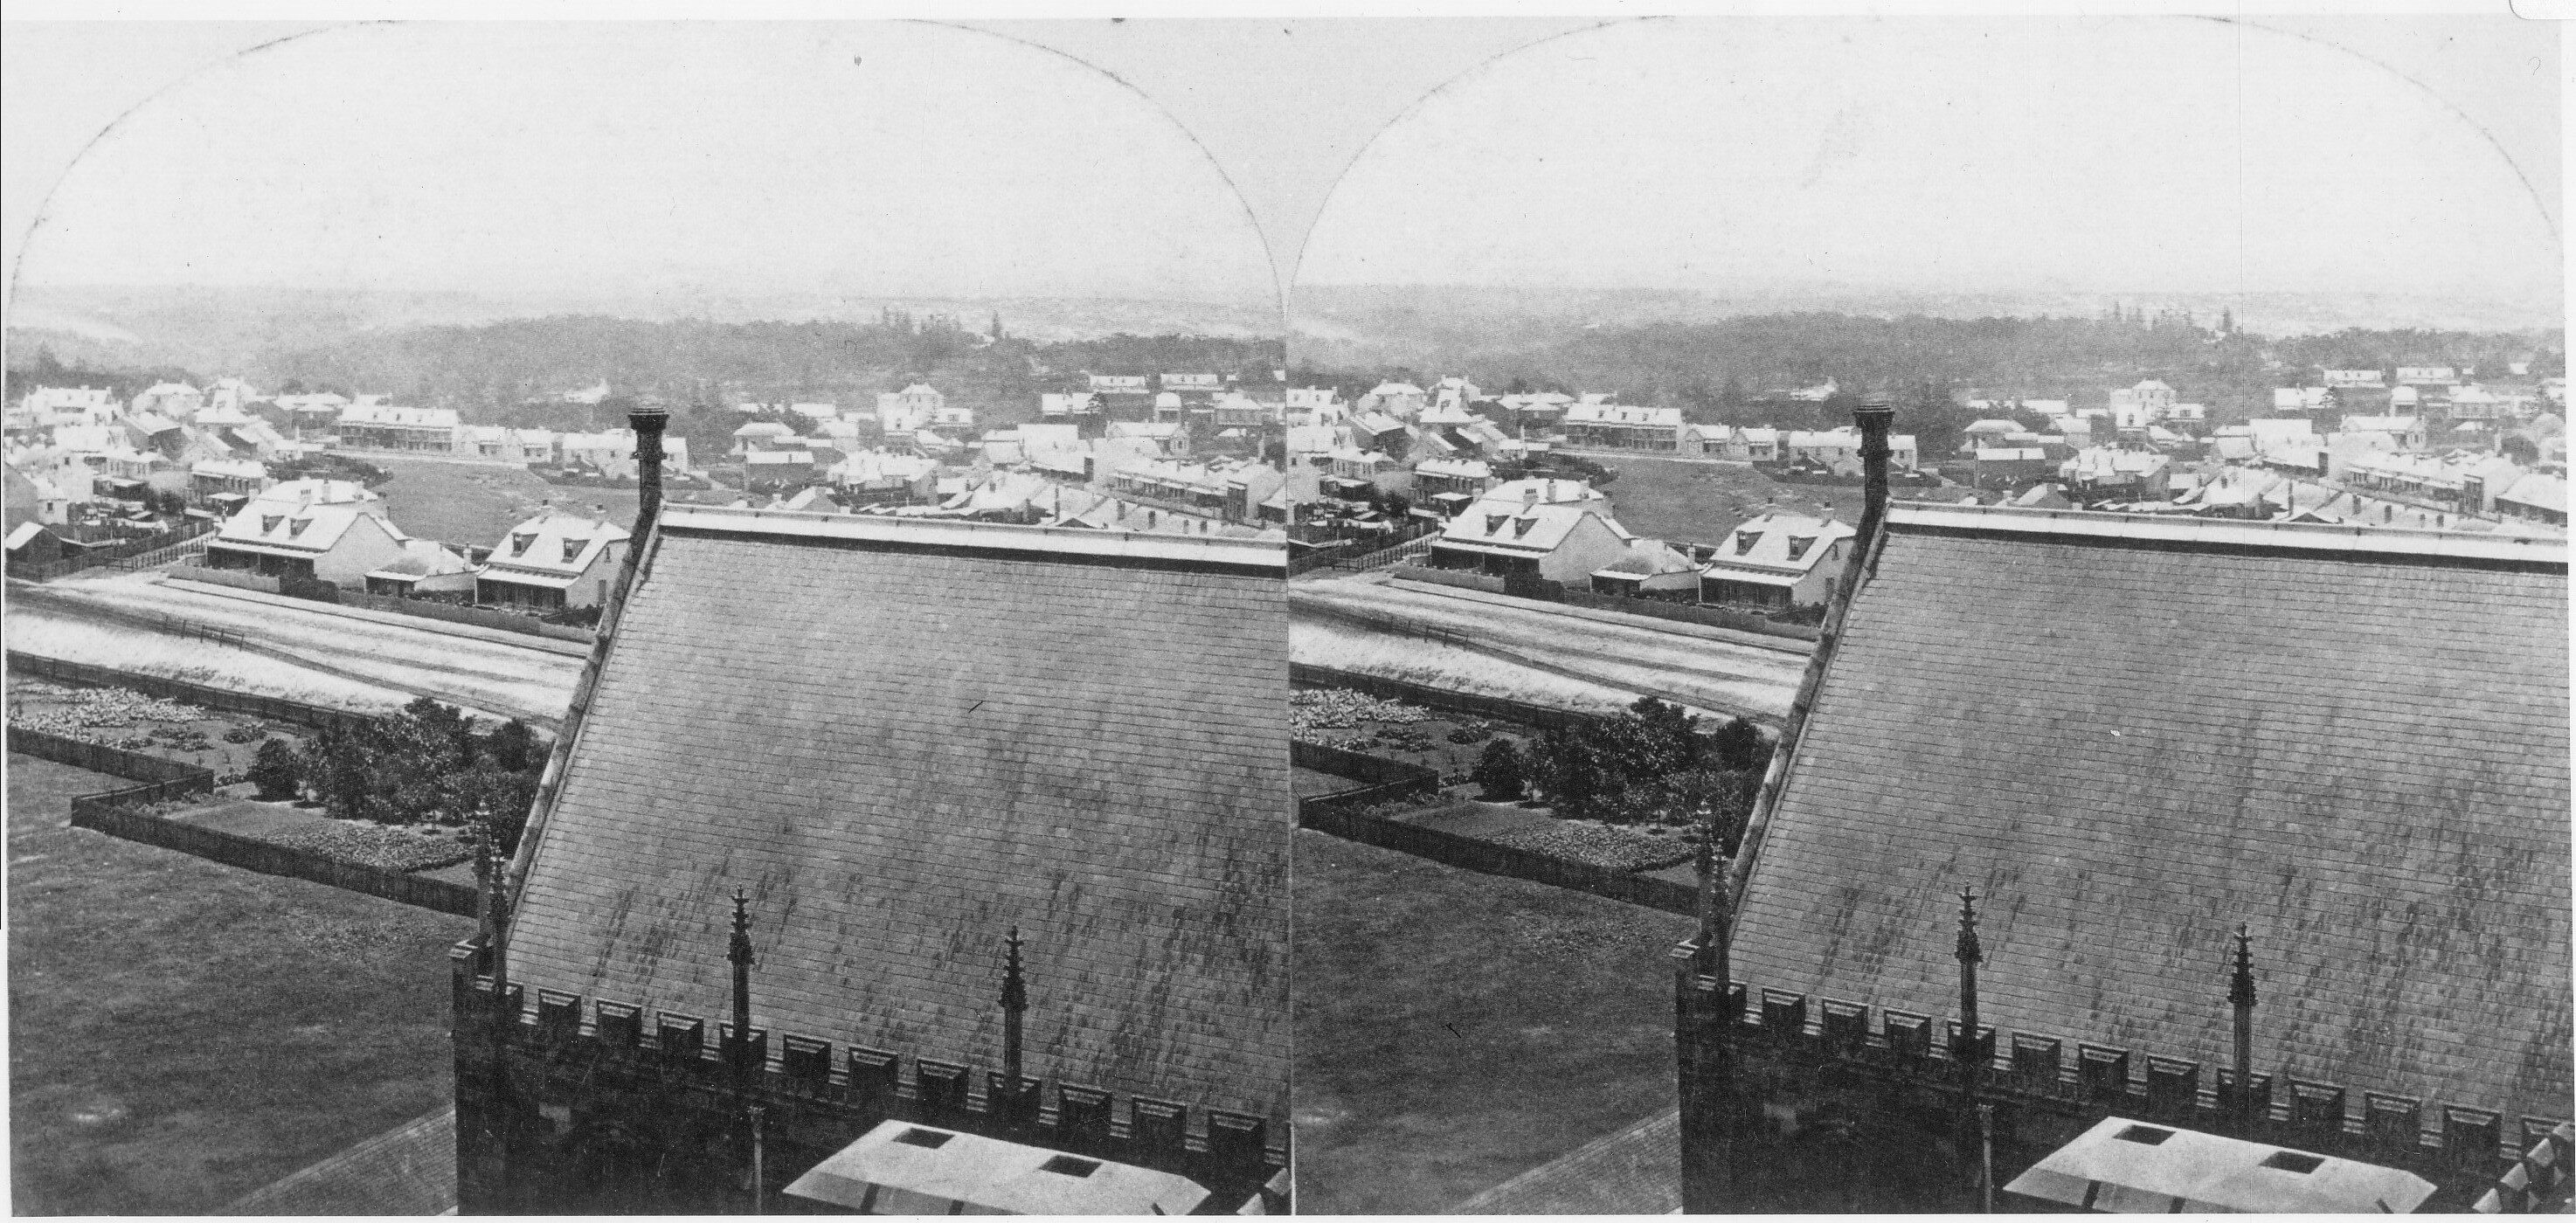 STEREO VIEW FROM CLOCK TOWER SHOWING ROOF OF GREAT HALL AND BEYOND